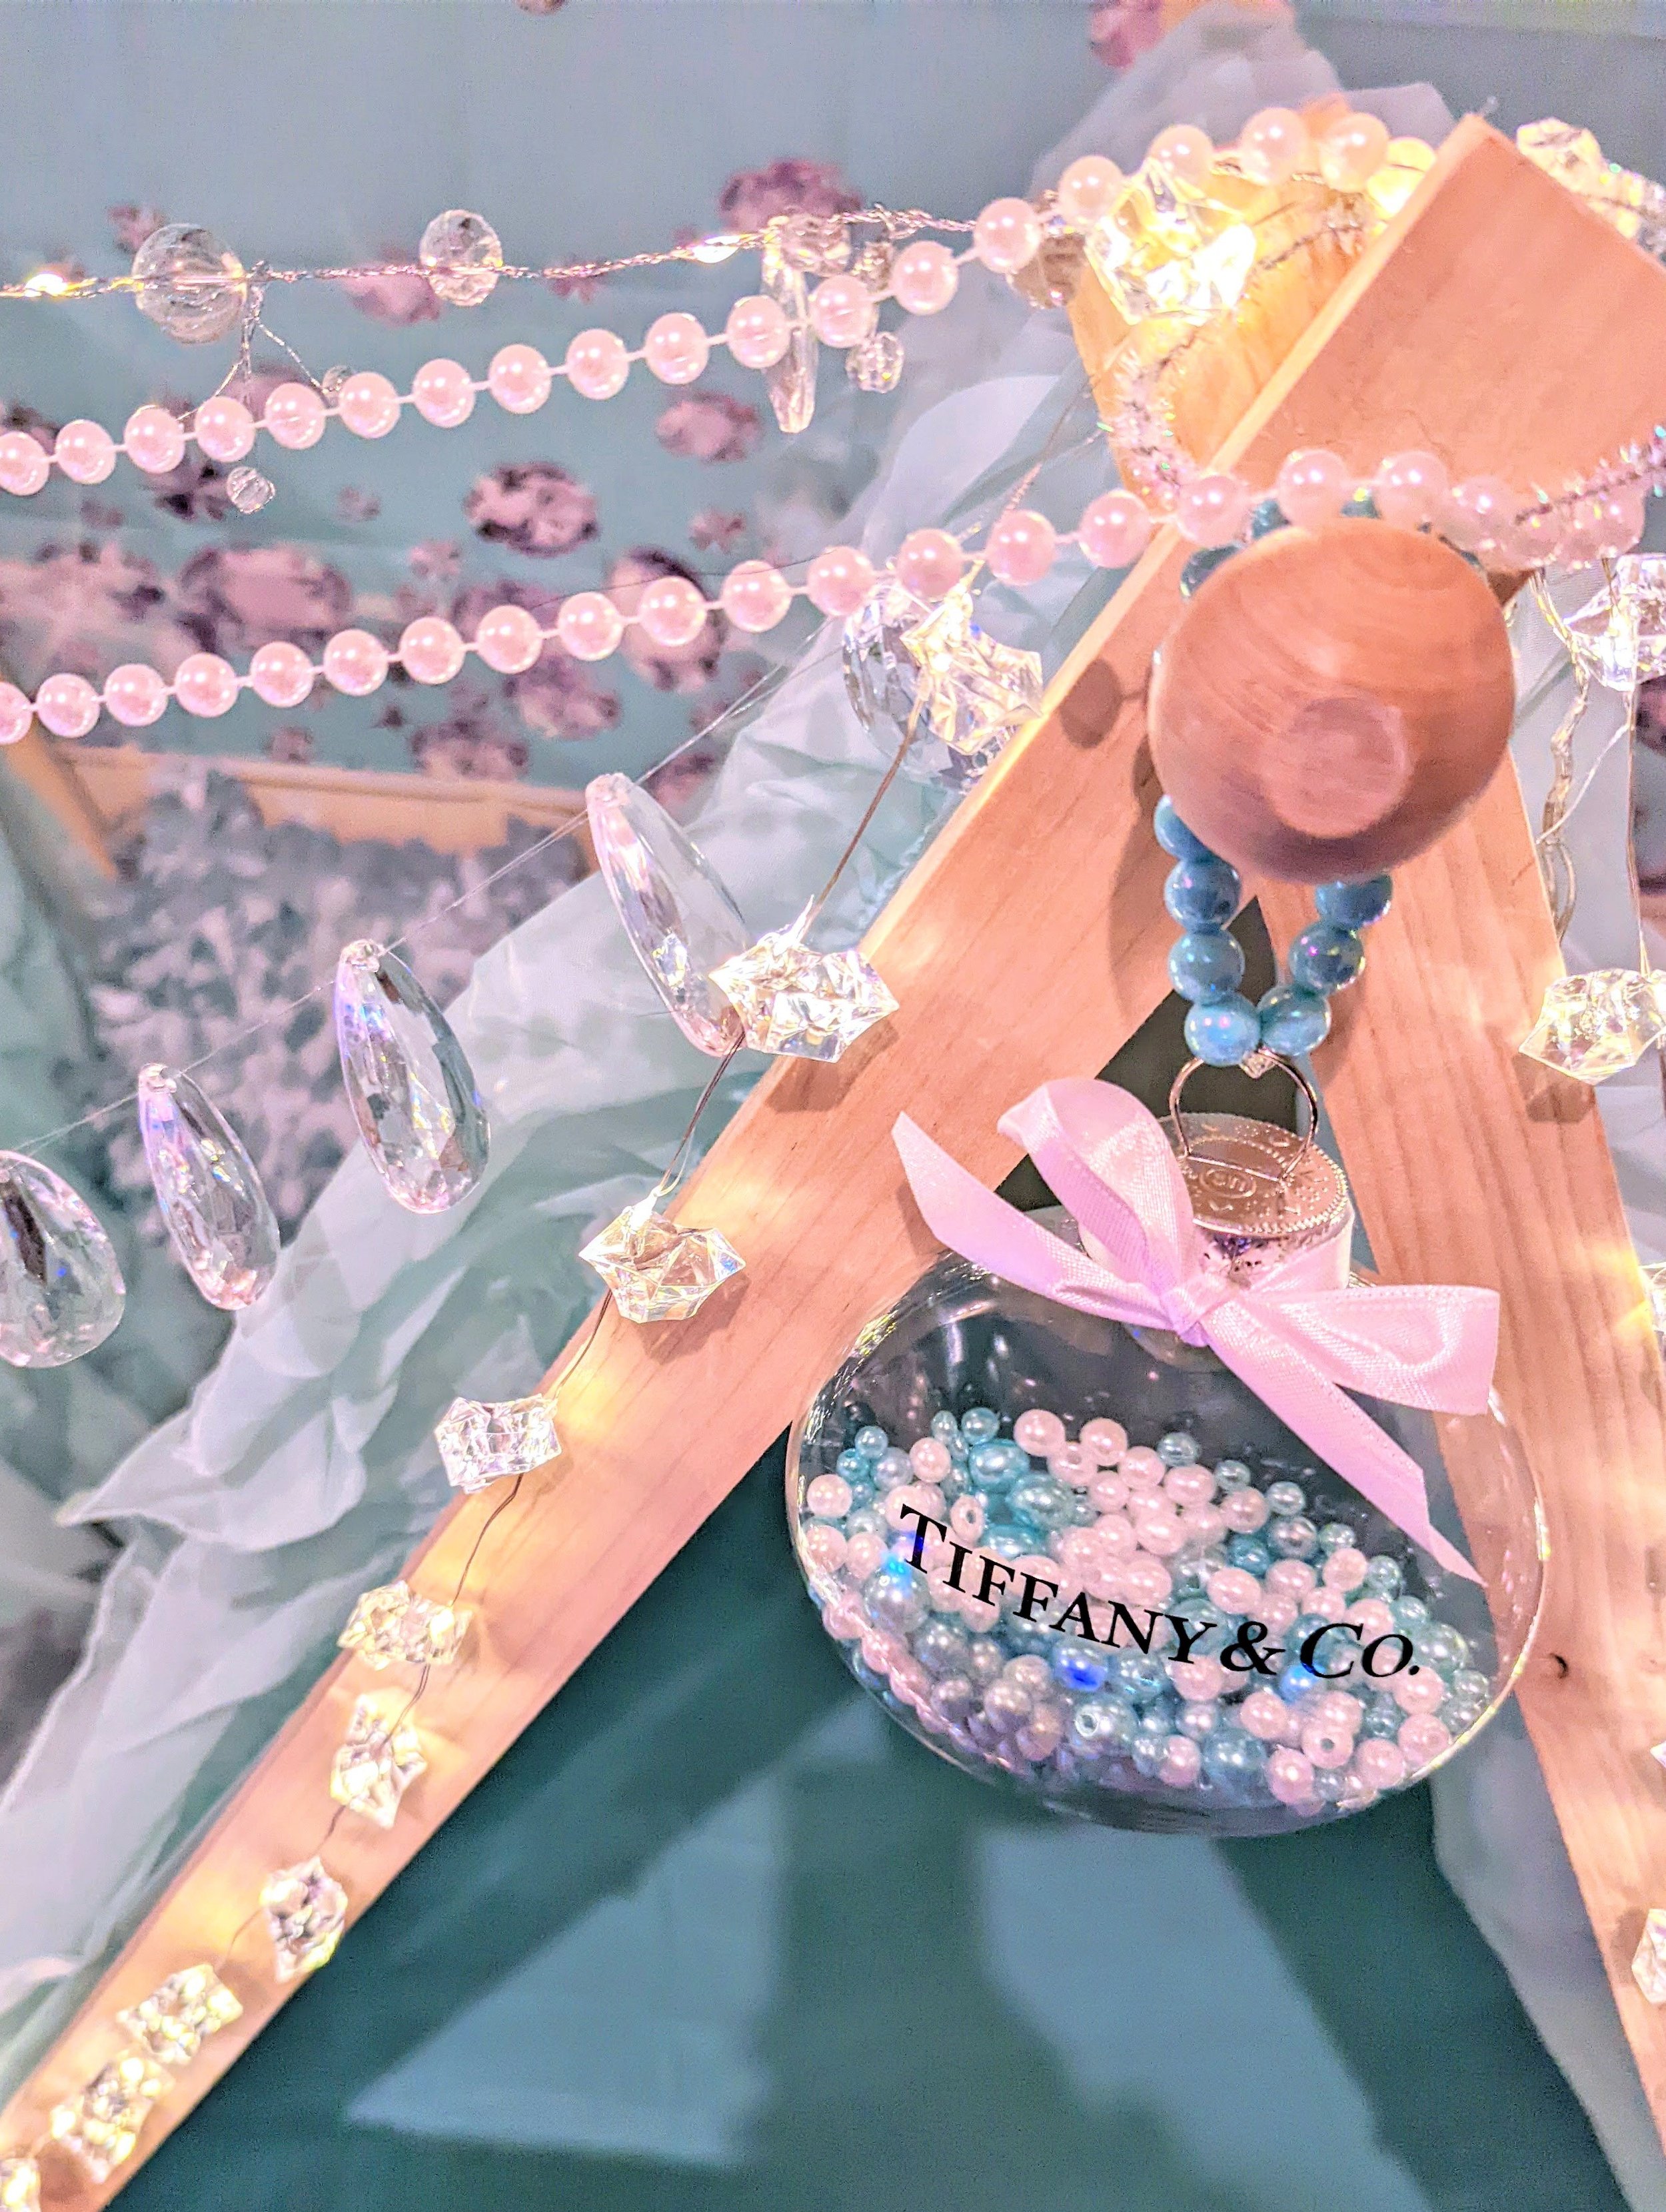 7 Best Ideas for a Pearl-Themed Party - Everything Enchanting